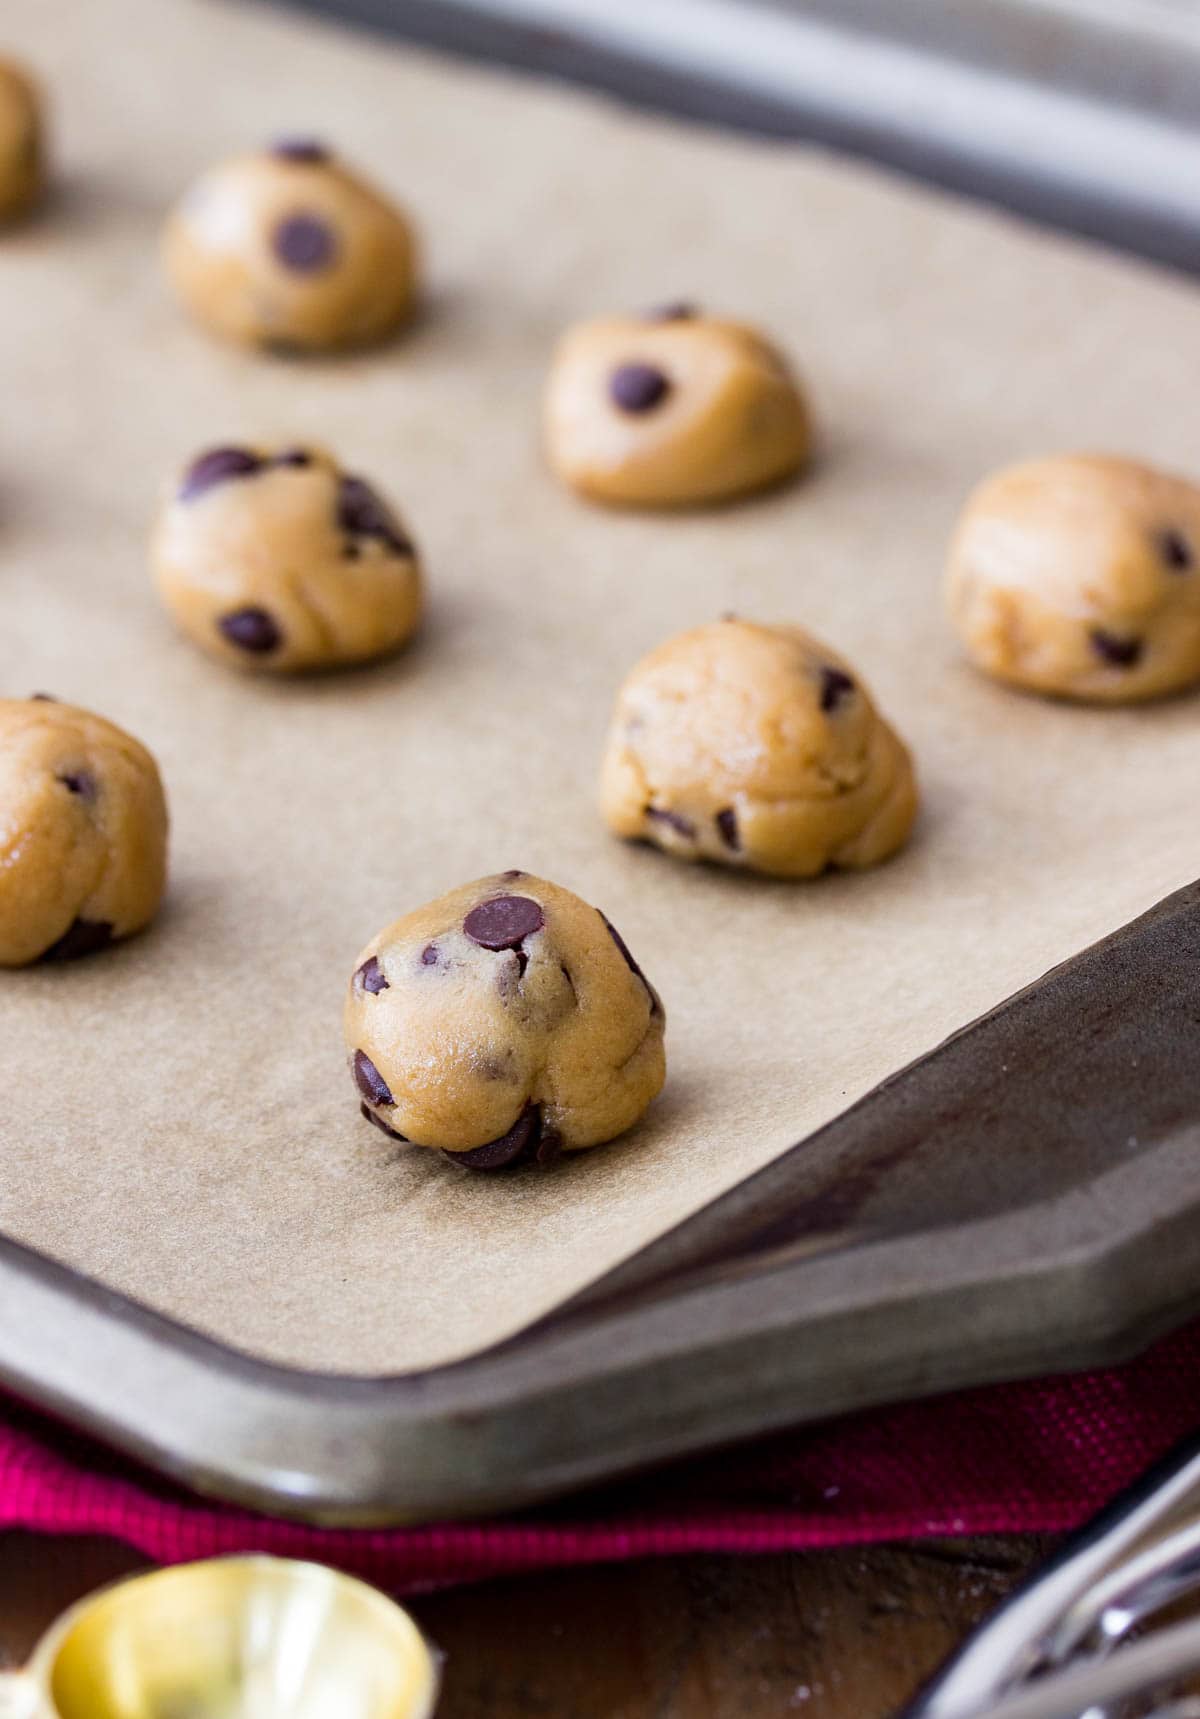 Tiny scoops of chocolate chip cookie dough on a parchment lined baking sheet.